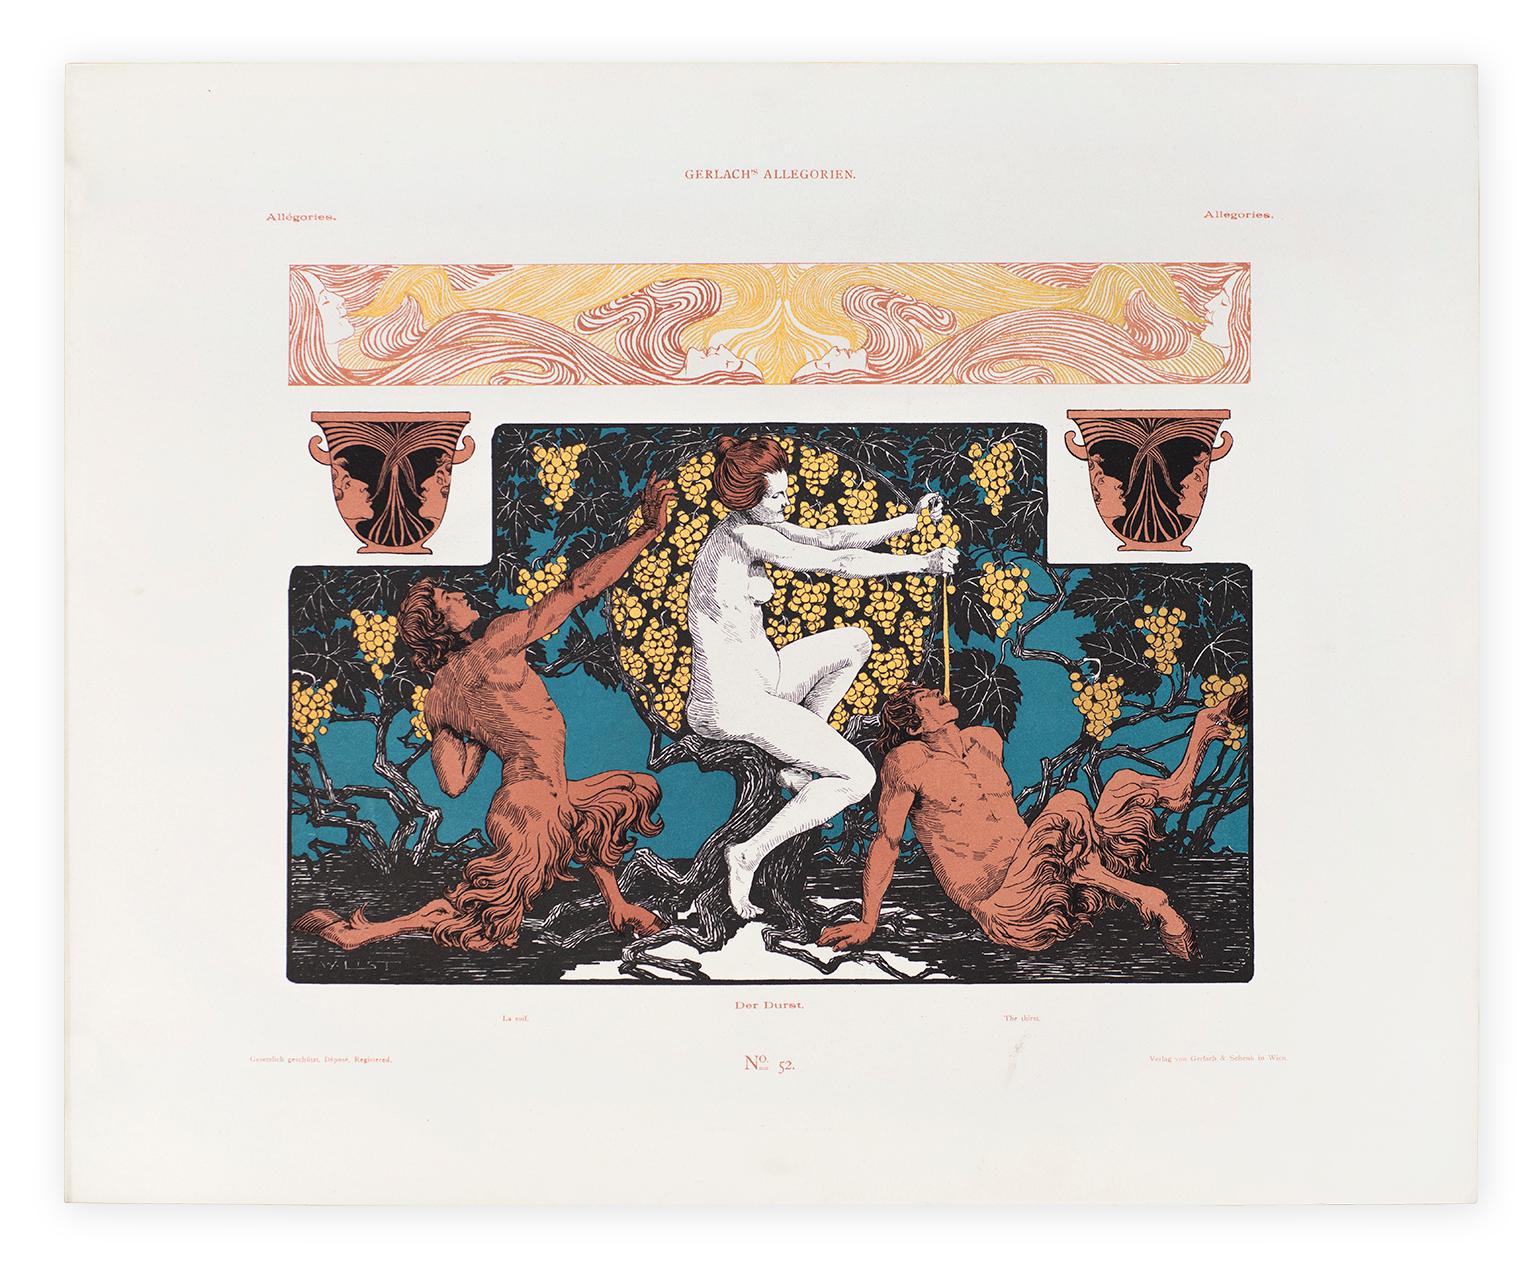 The Thirst, Plate 52 from Gerlach's Allegorien, Vienna Secession lithograph